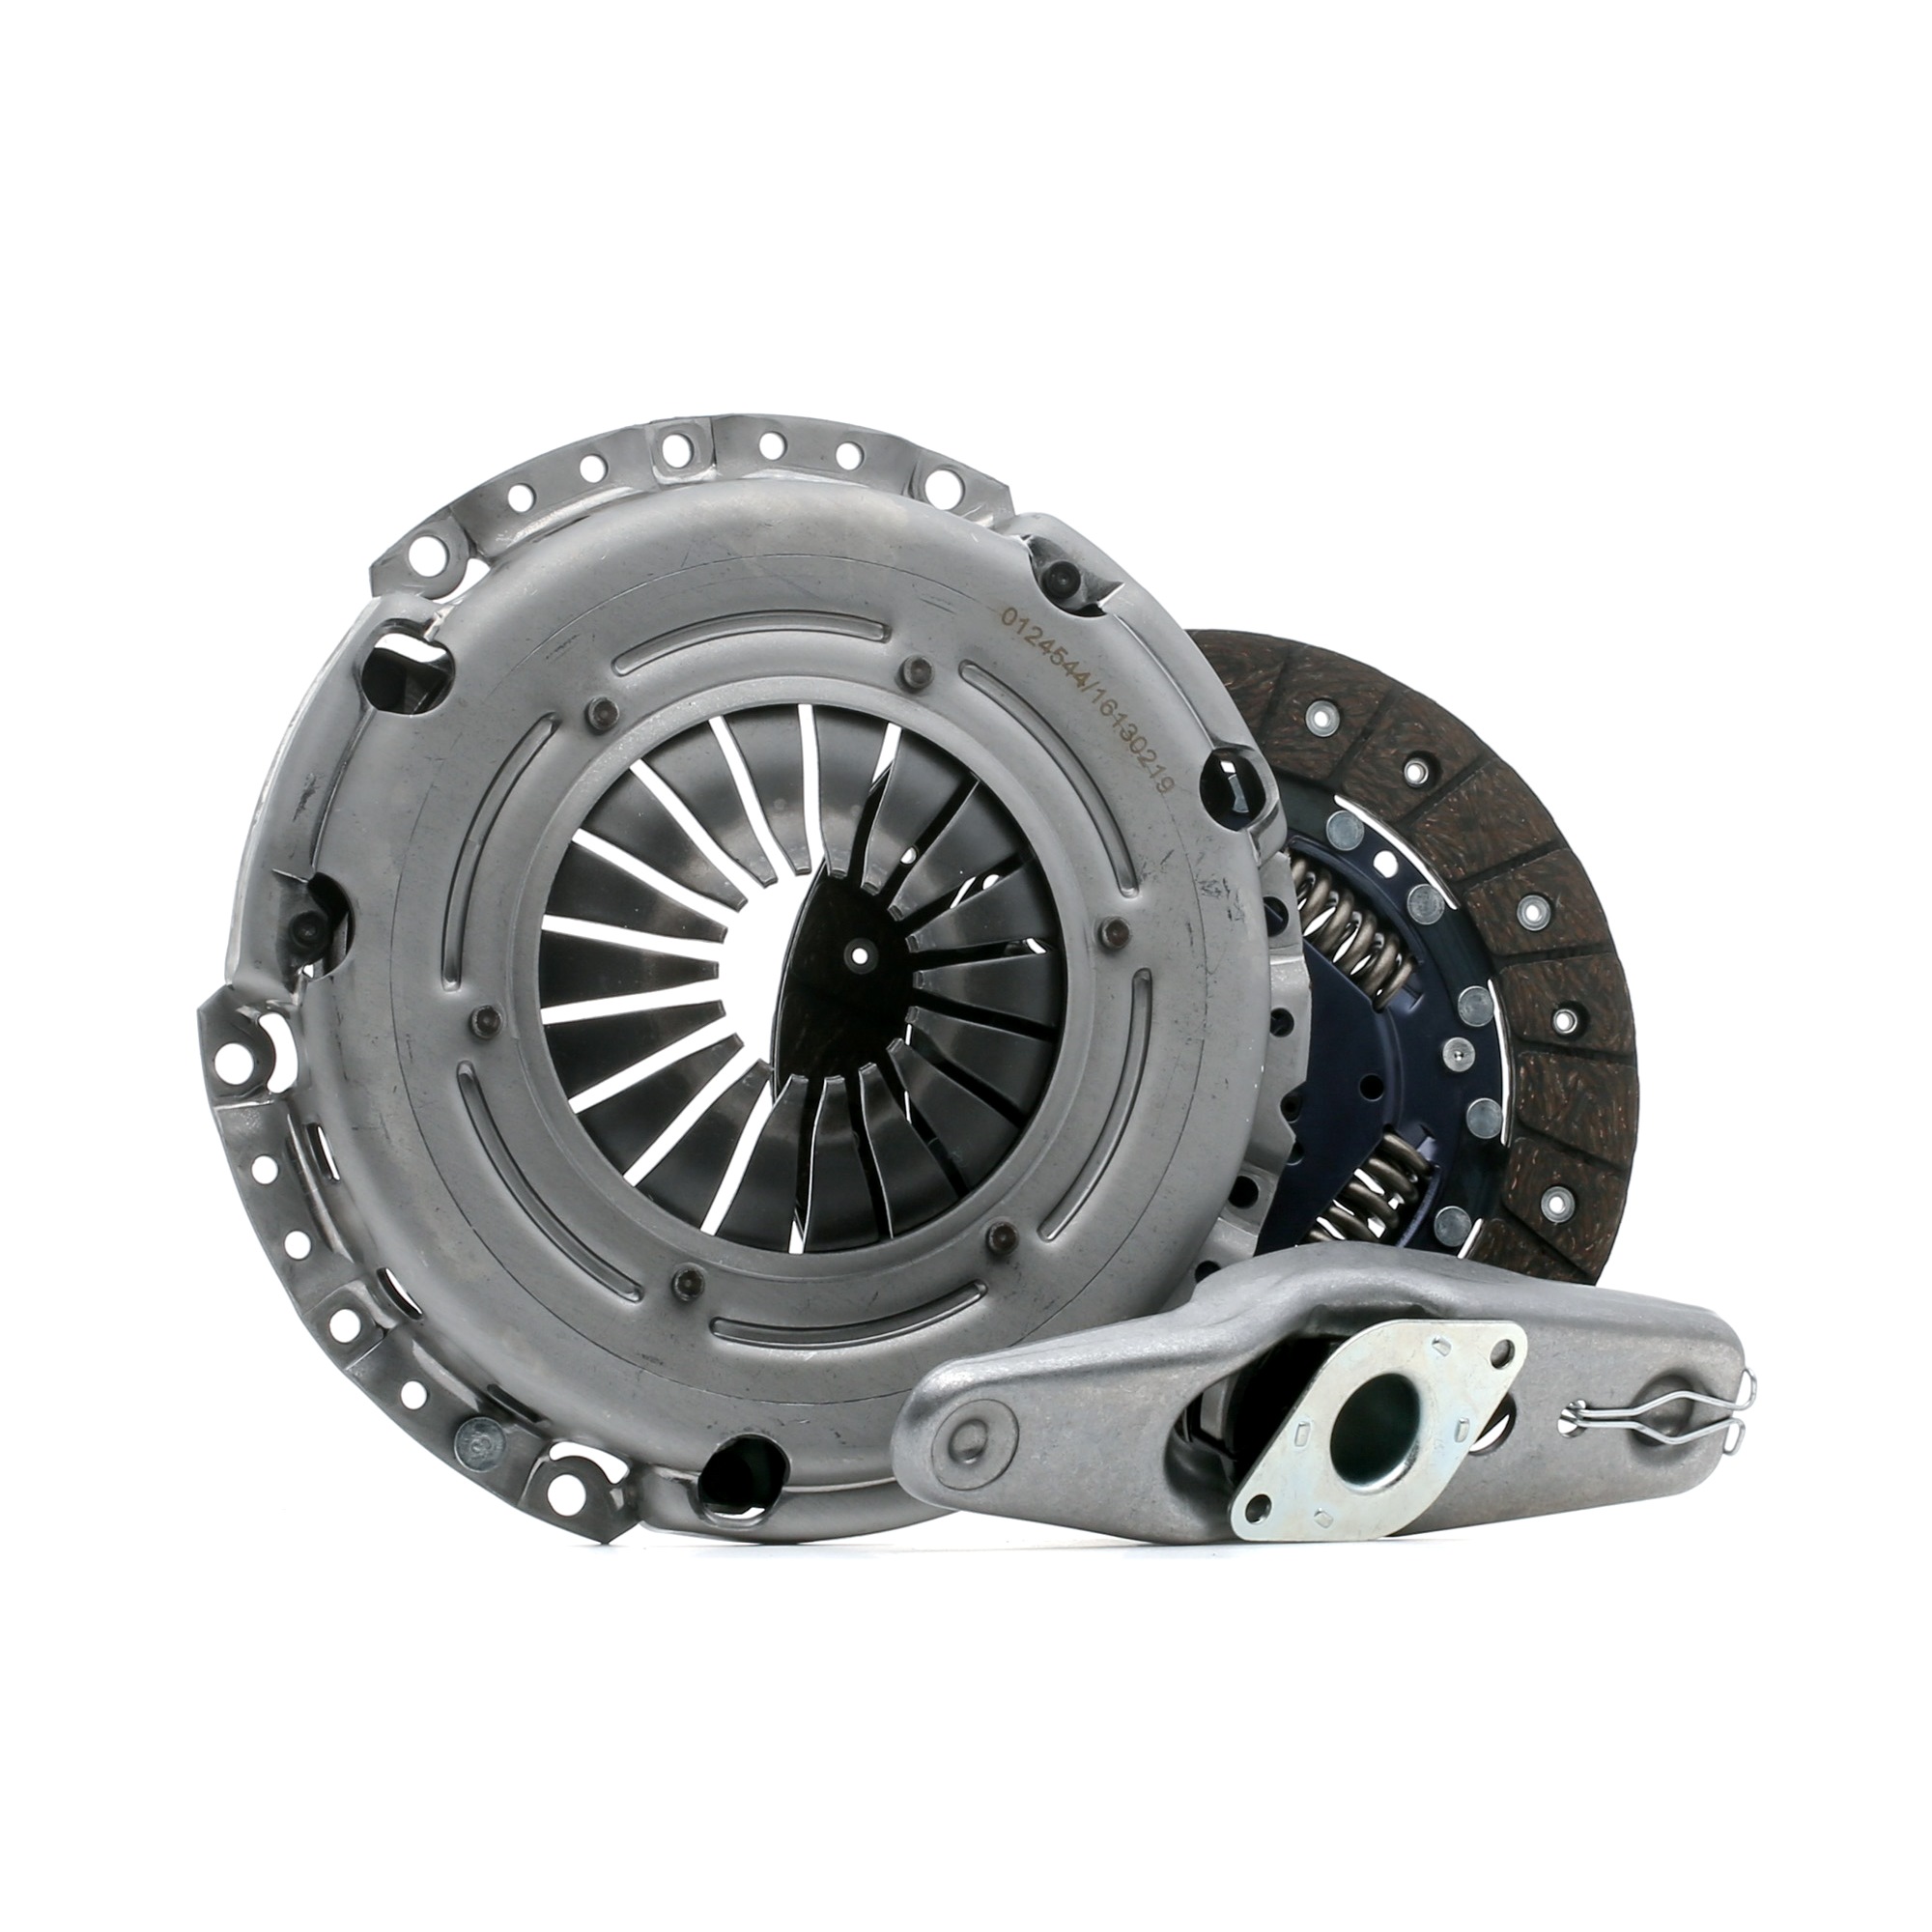 SKCK-0101278 STARK Clutch set VW three-piece, with clutch pressure plate, with clutch release bearing, with clutch disc, with release fork, 200mm